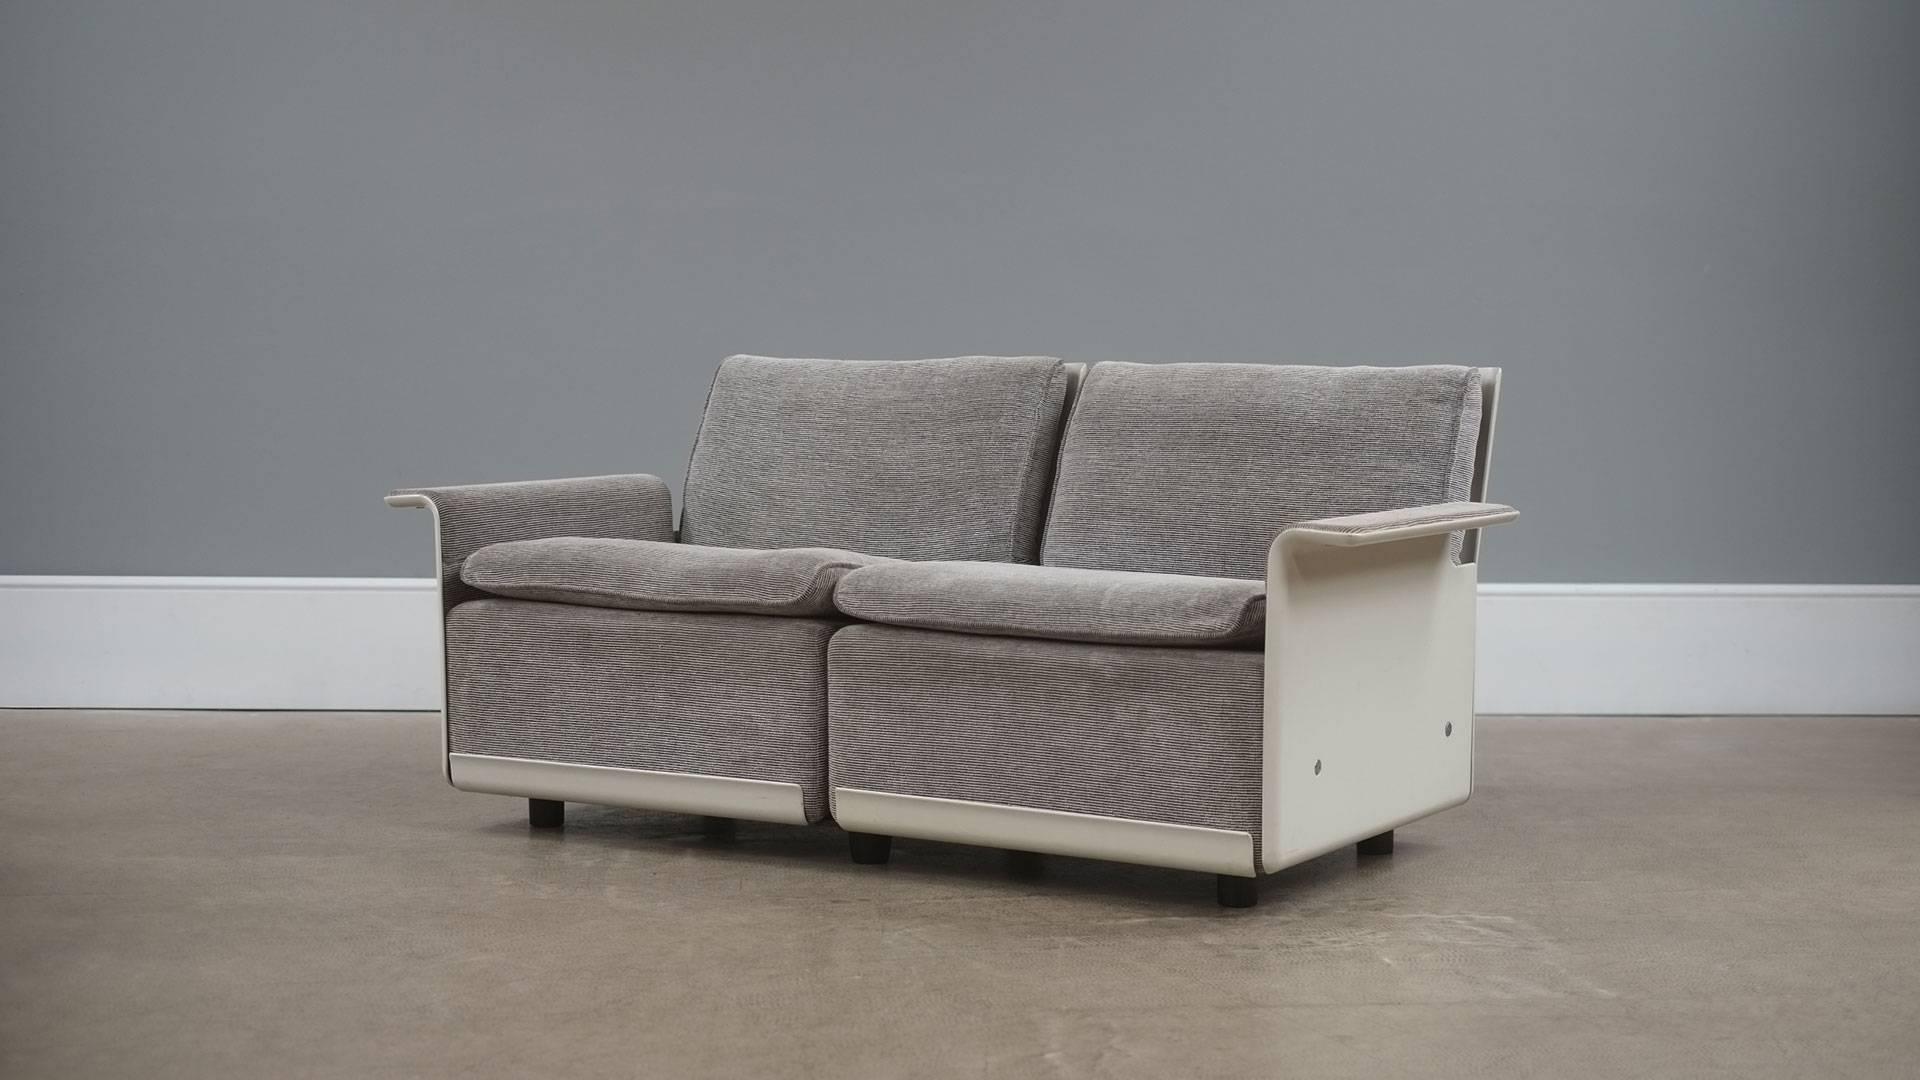 Wonderful example of Dieter Ram’s famous 620 Programme sofa for Vitsoe, Germany.